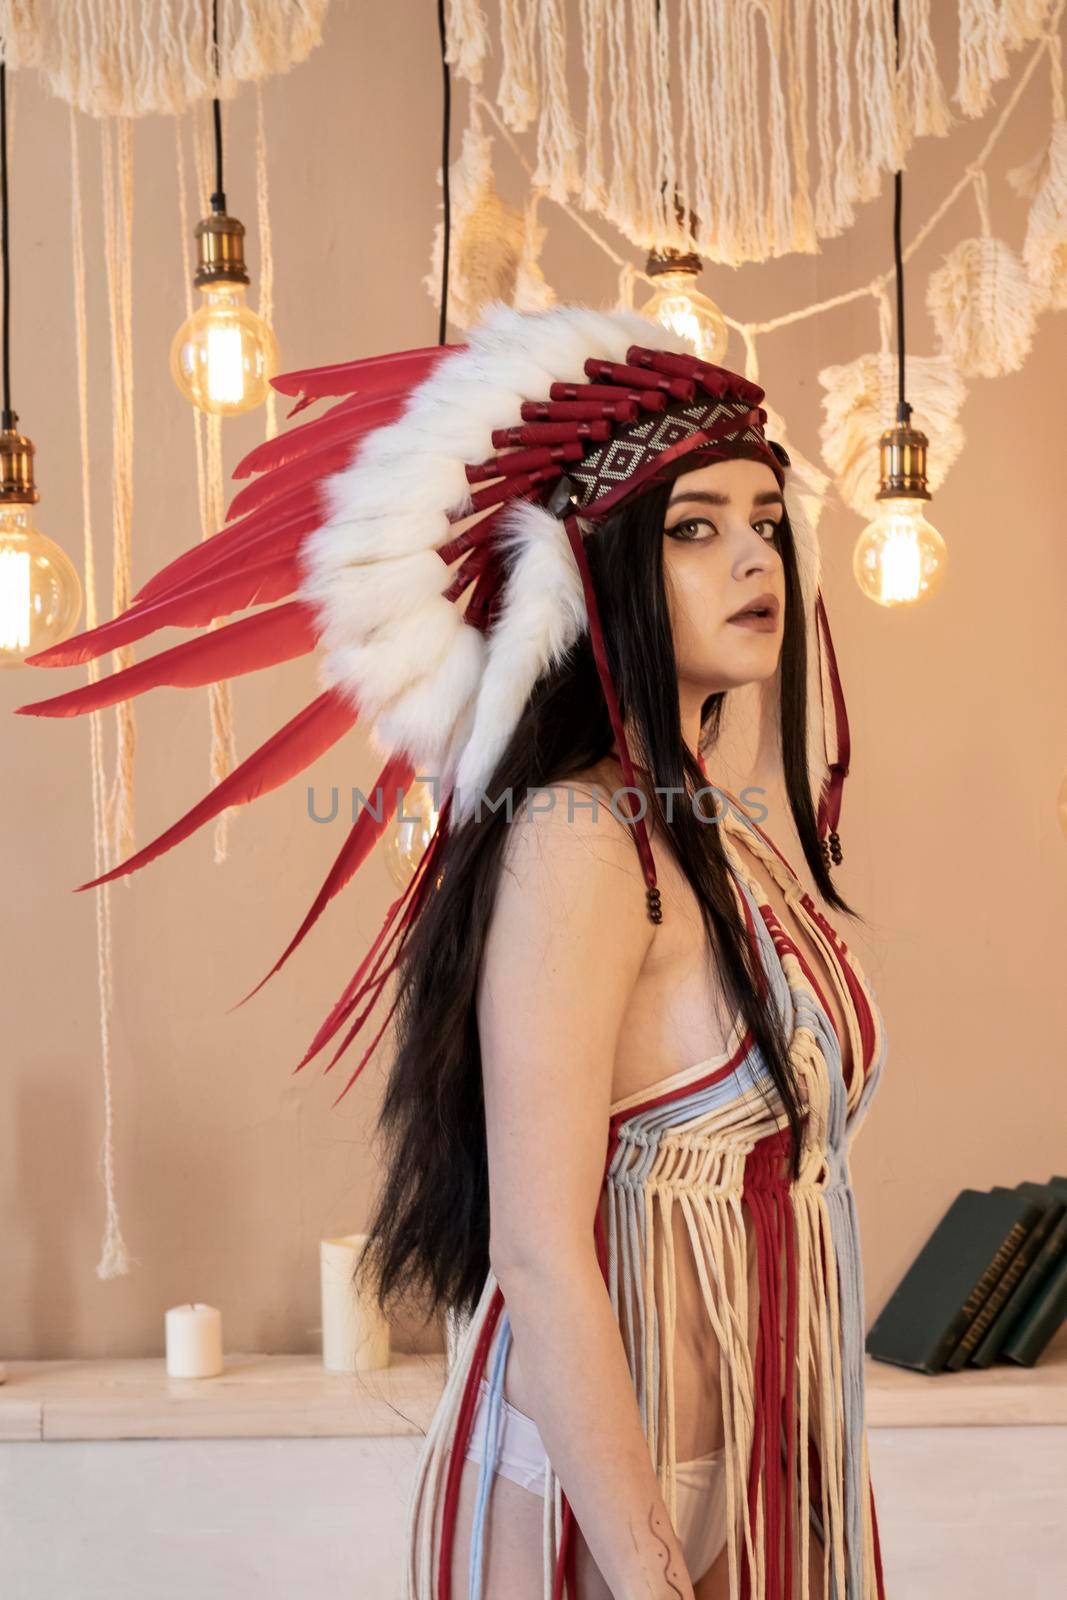 Native American Indian woman. Fashionable young lady in Indian roach. Boho style dress.